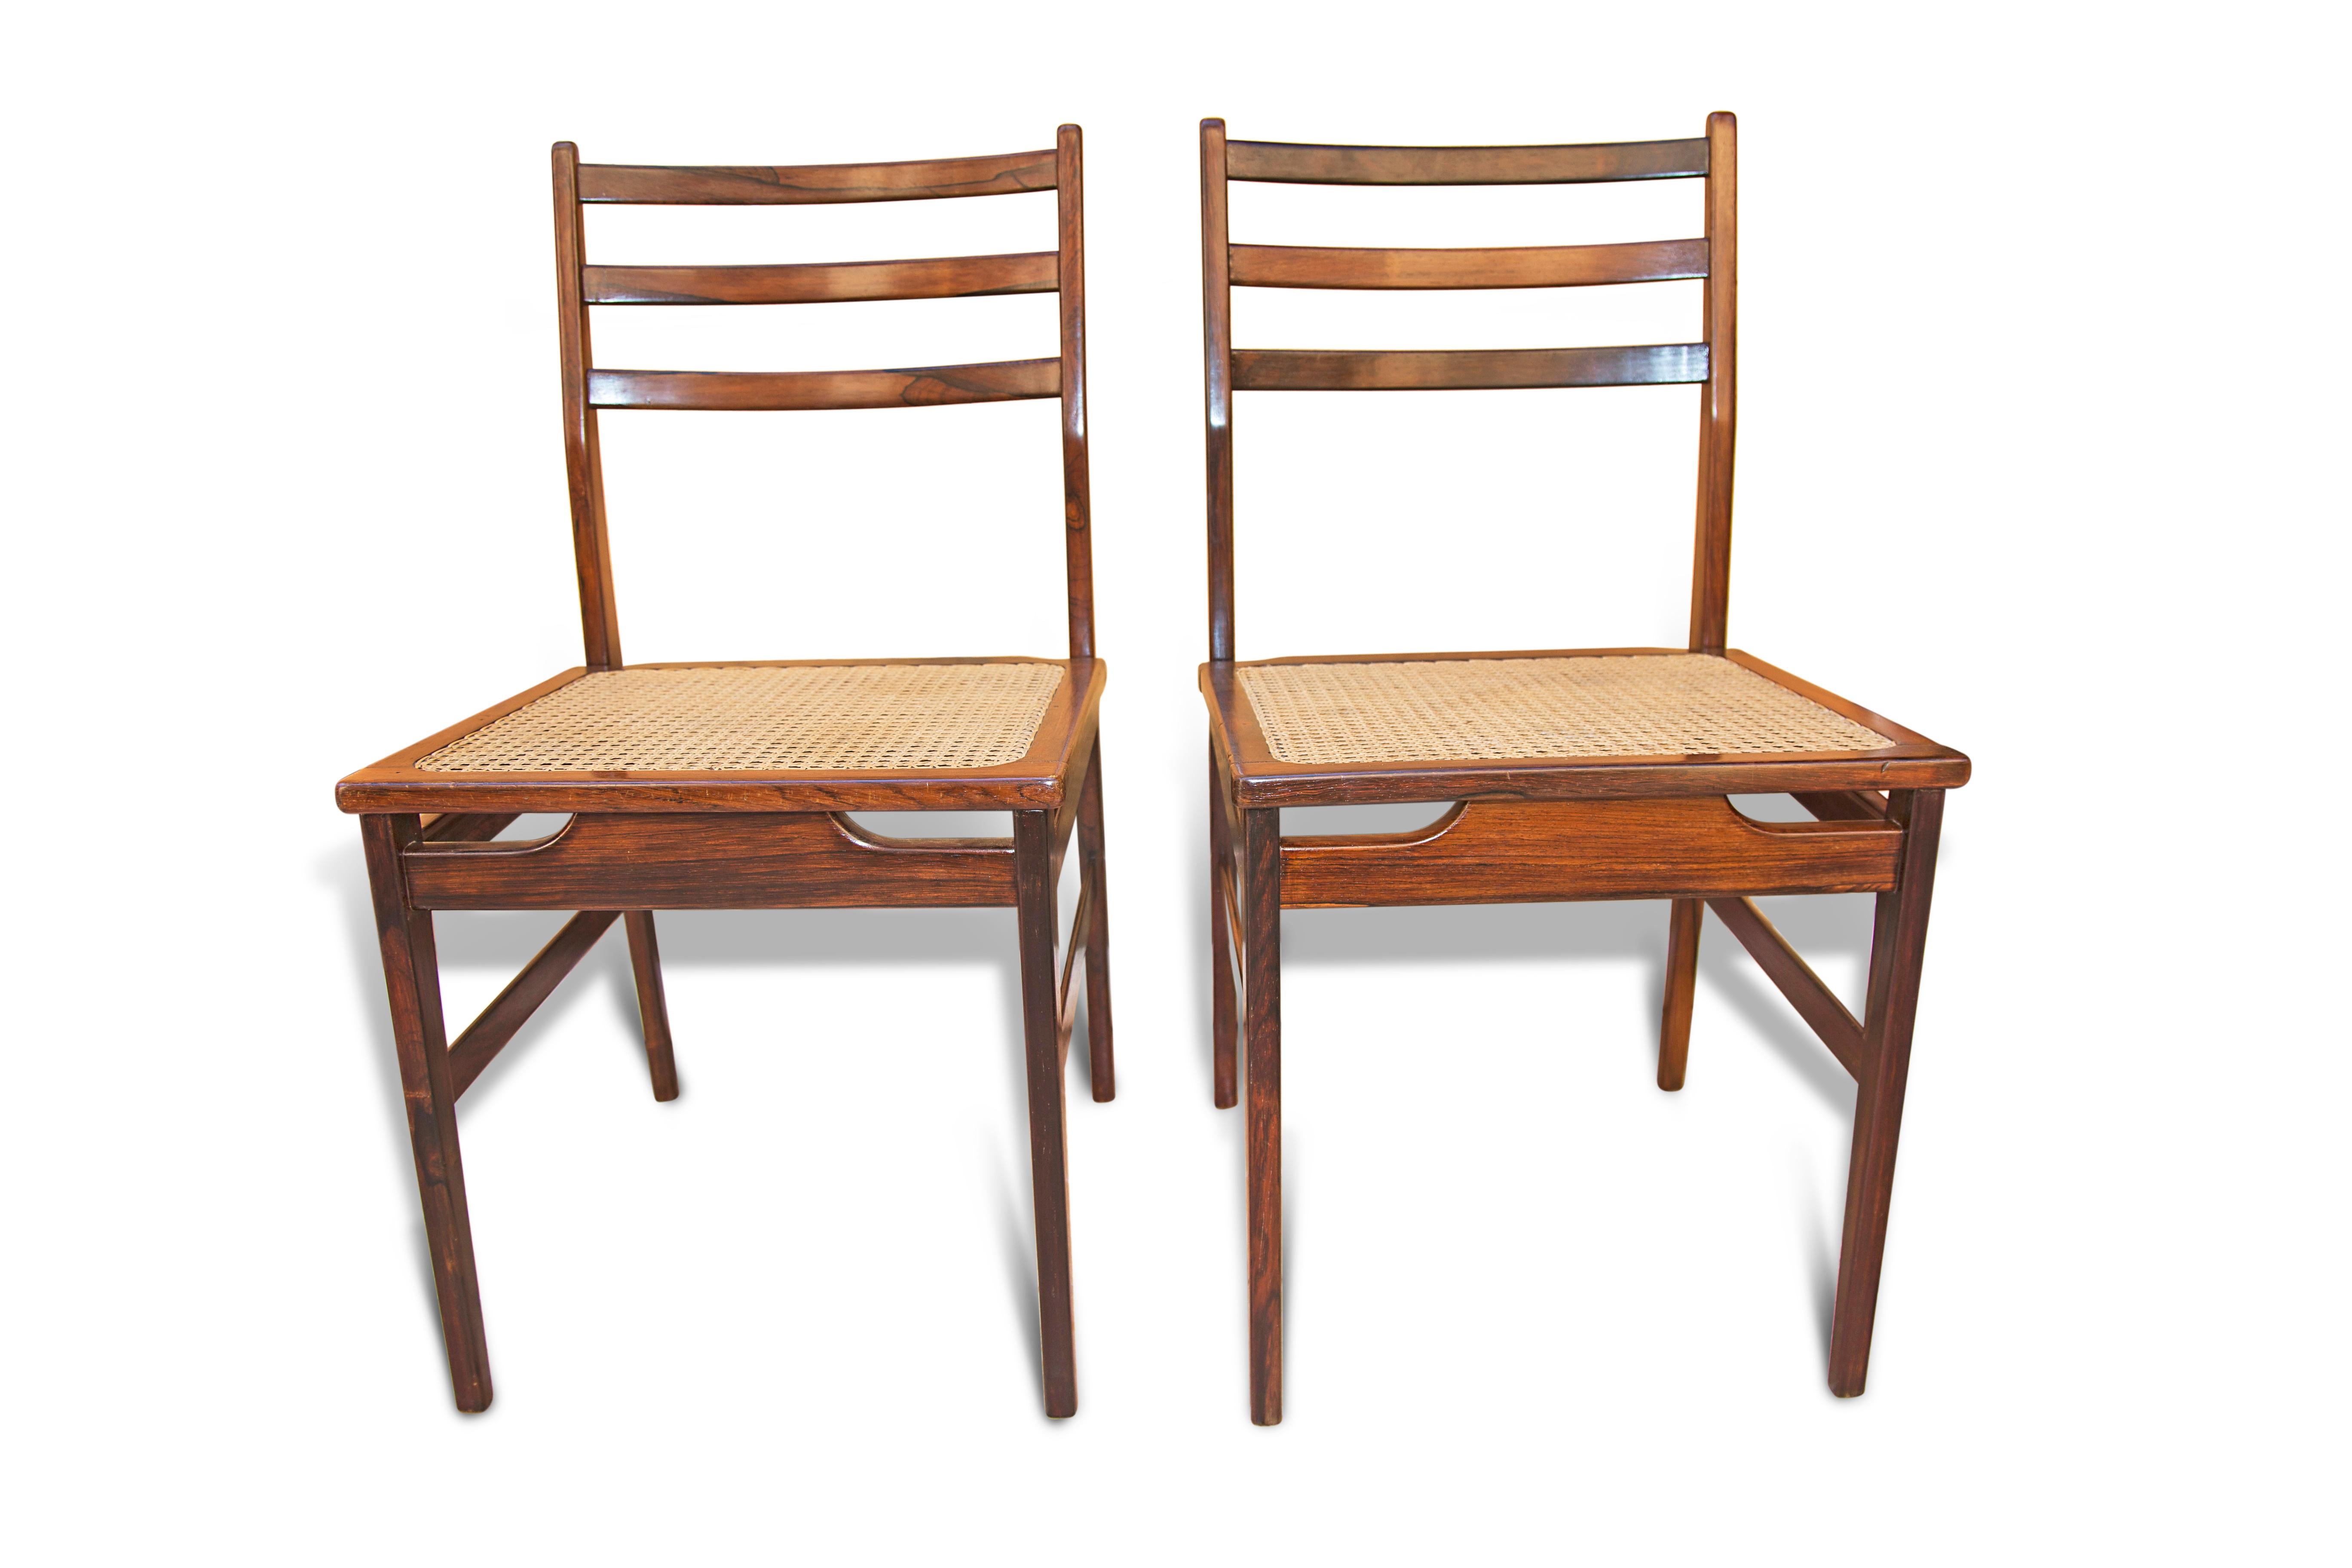 Brazilian Modern Chairs in Hardwood & Cane by Alexandre Rapoport, 1960s, Brazil In Good Condition For Sale In New York, NY